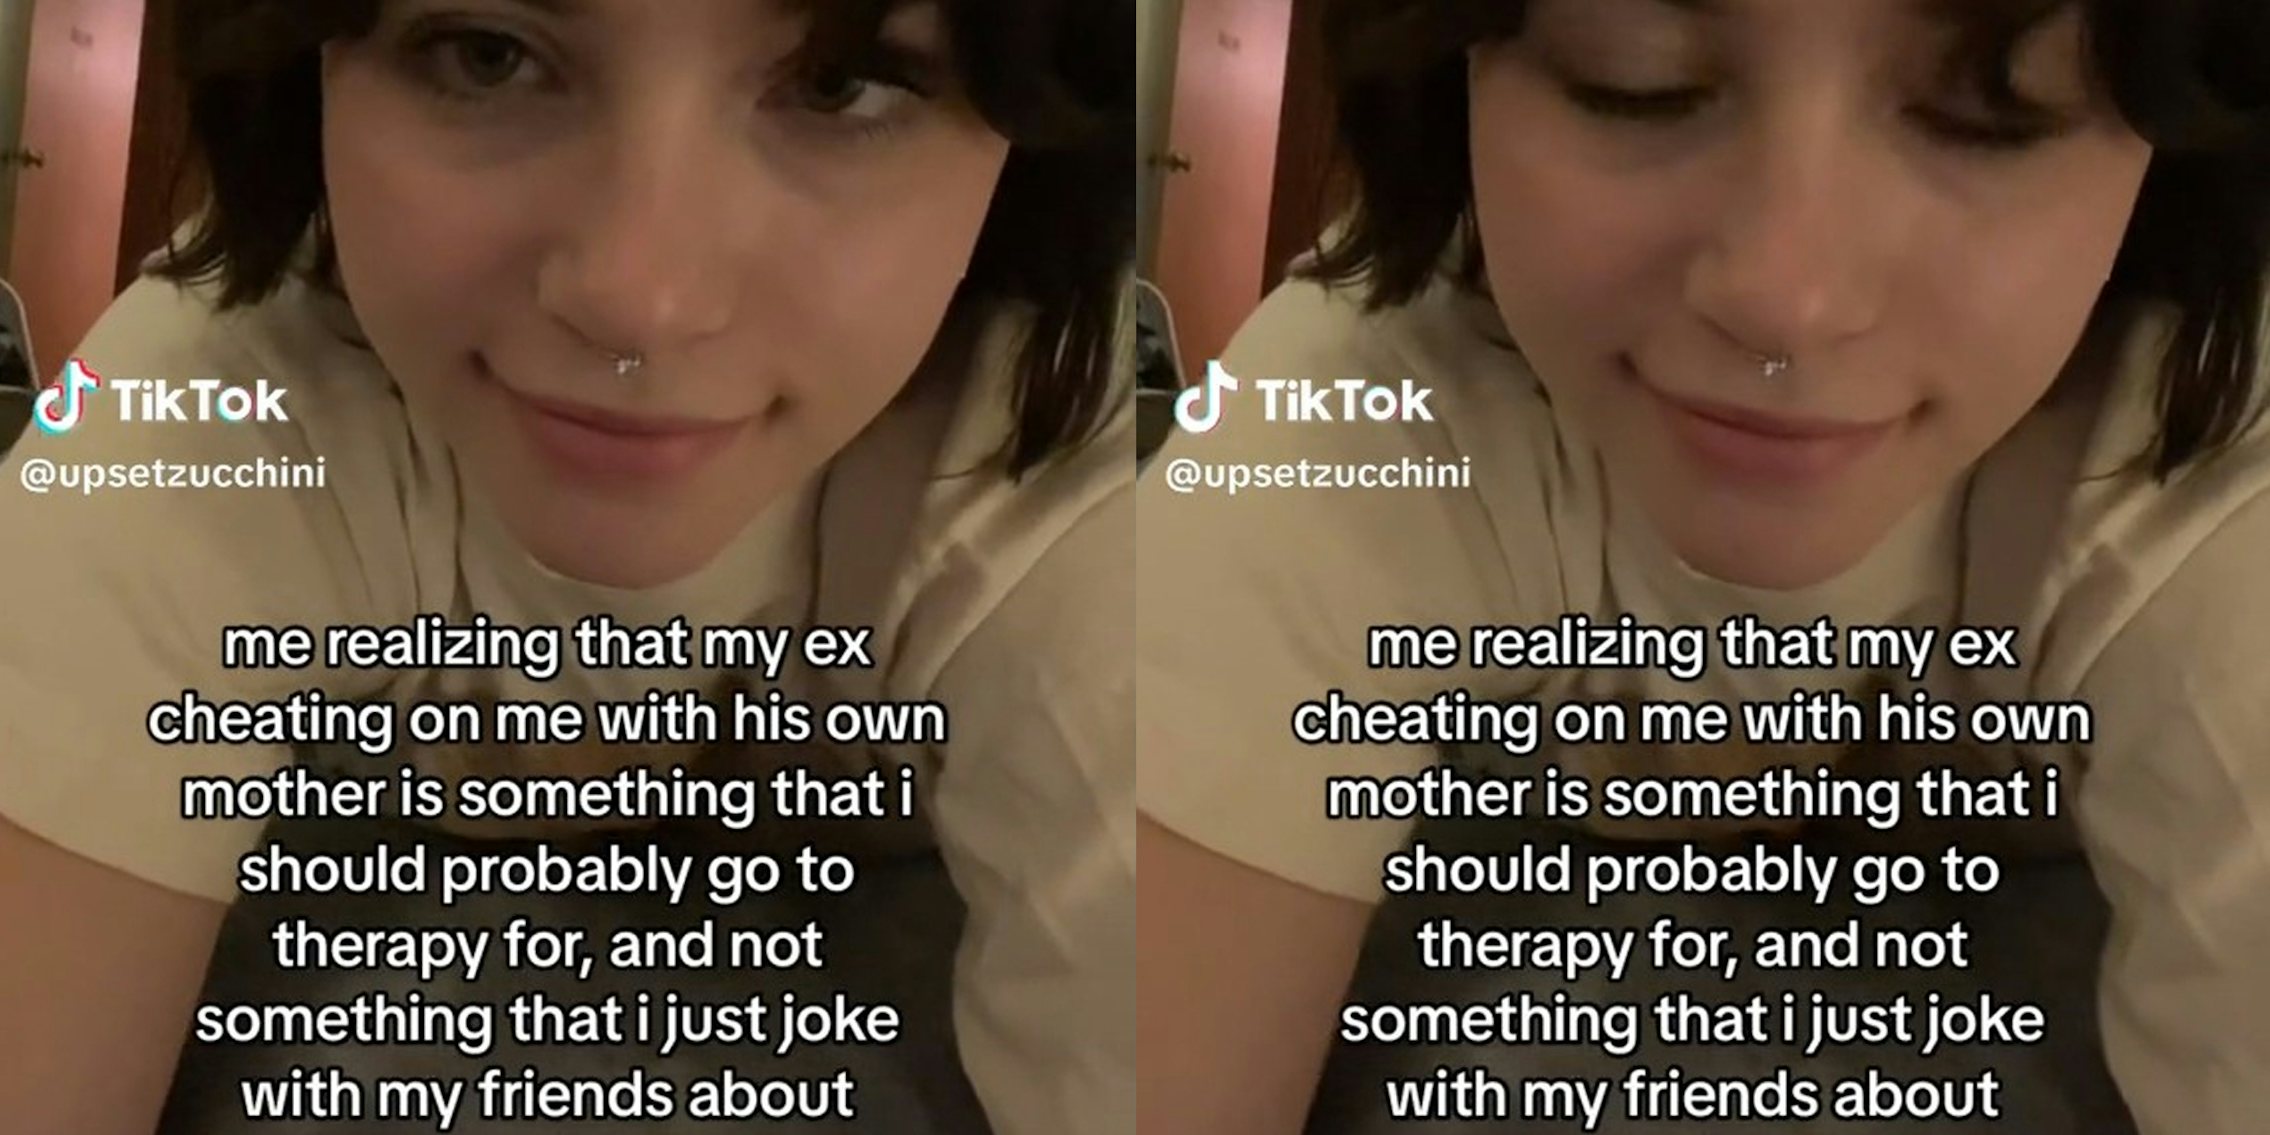 young woman with caption 'me realizing that my ex cheating on me with his own mother is something that i should probably go to therapy for, and not just something that i just joke with my friends about'